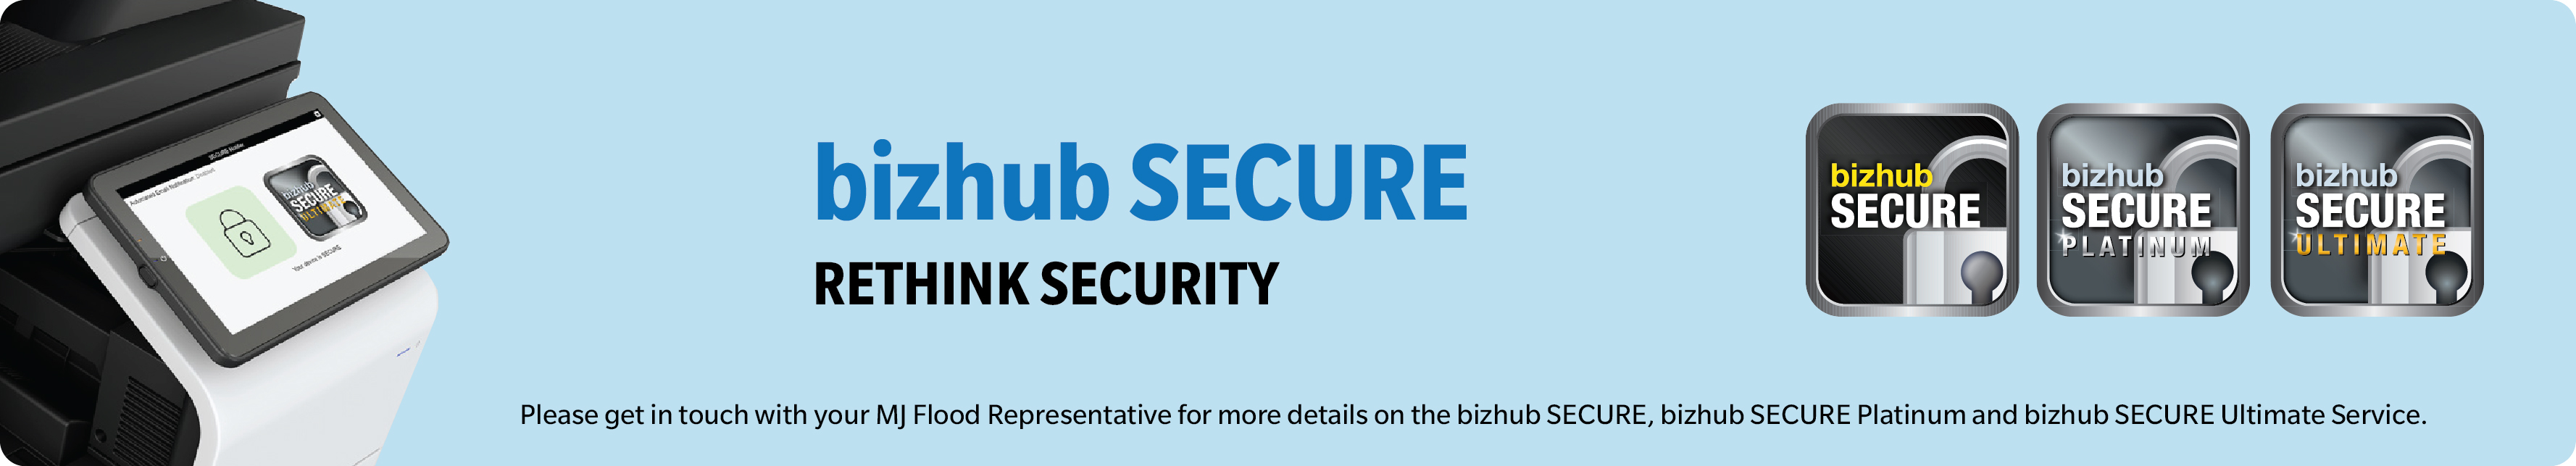 Enhanced Business Security with Bizhub Secure: Ensuring Smart Protection